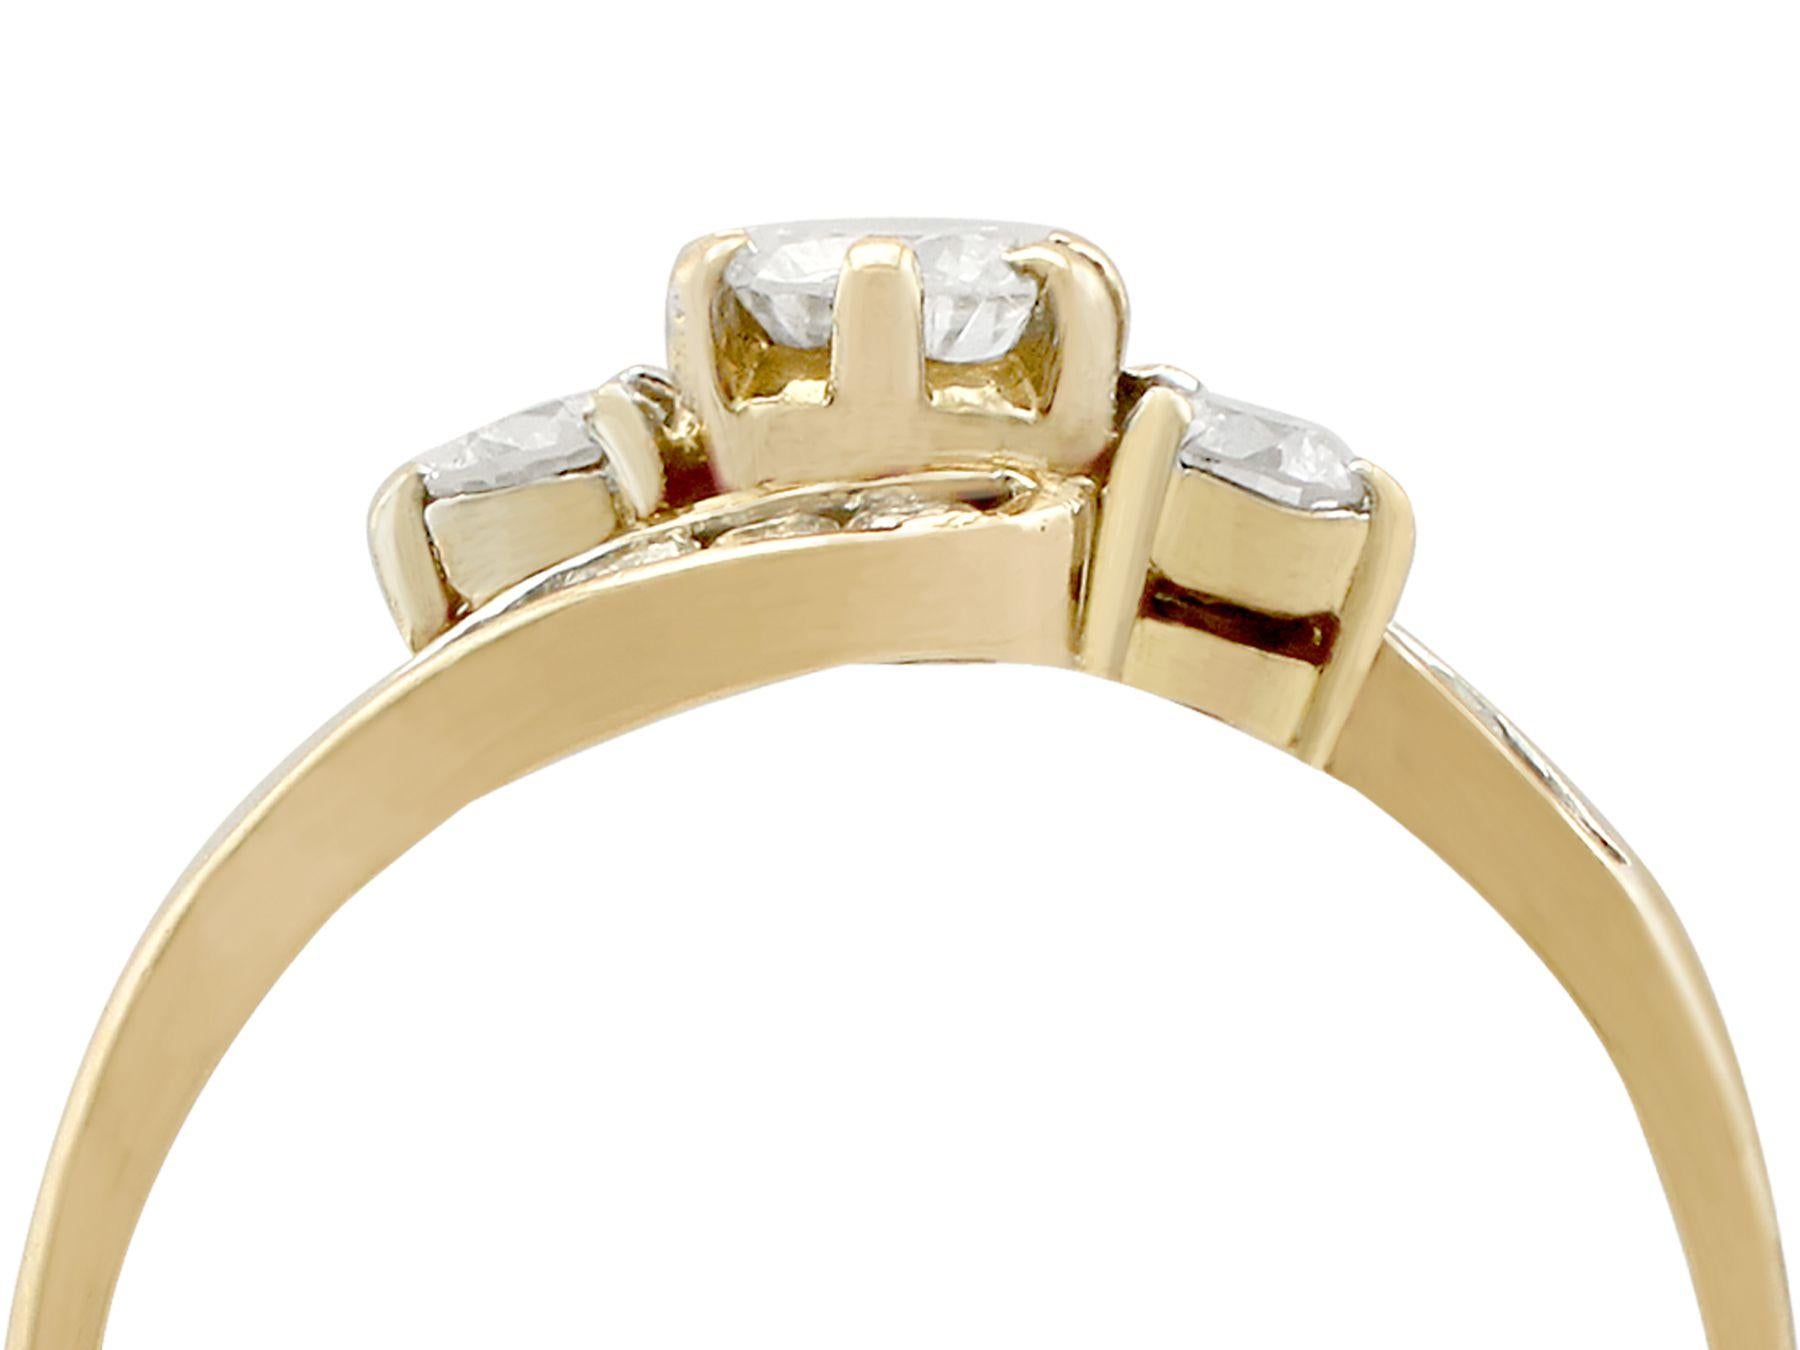 An impressive vintage 1980s 0.67 carat diamond and 18k yellow gold twist style dress ring; part of our diverse diamond jewelry and estate jewelry collections.

This fine and impressive diamond dress ring has been crafted in 18k yellow gold.

The